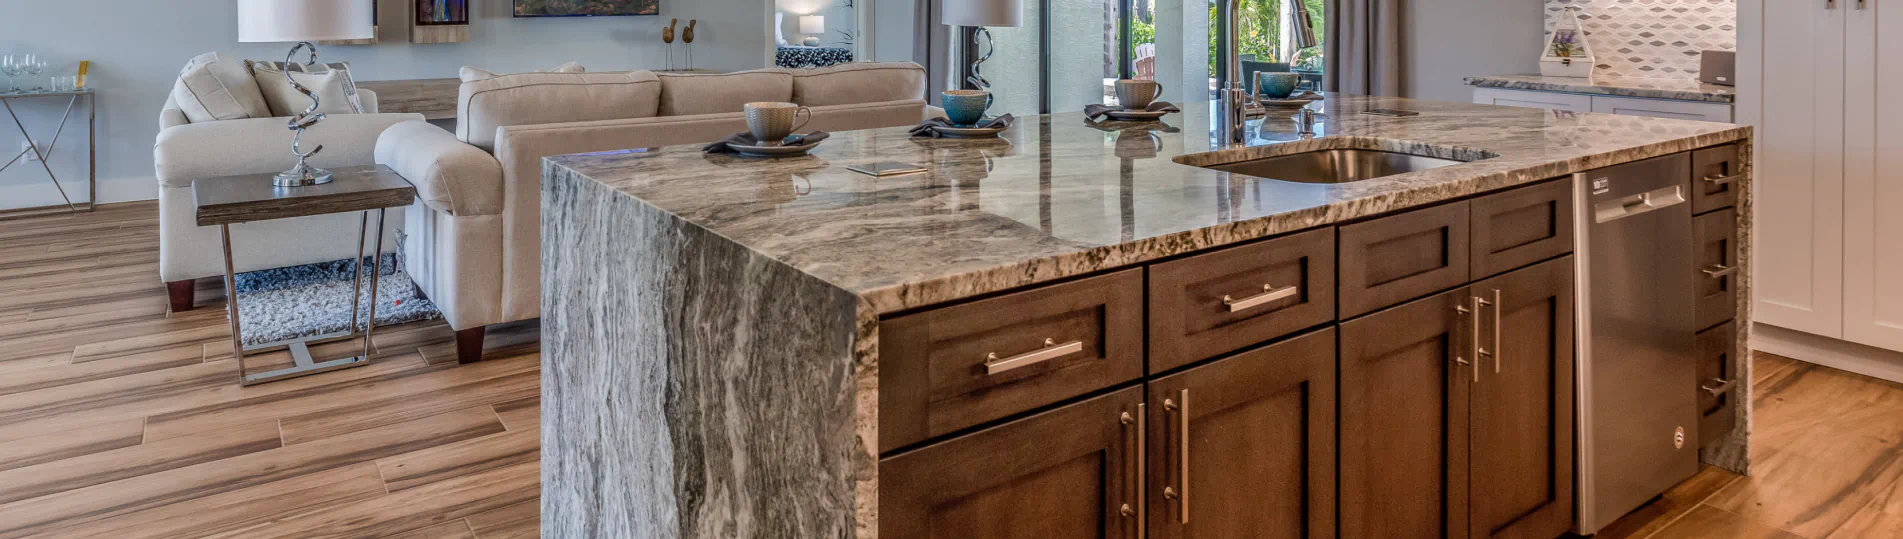 luxury kitchen with marble counter top